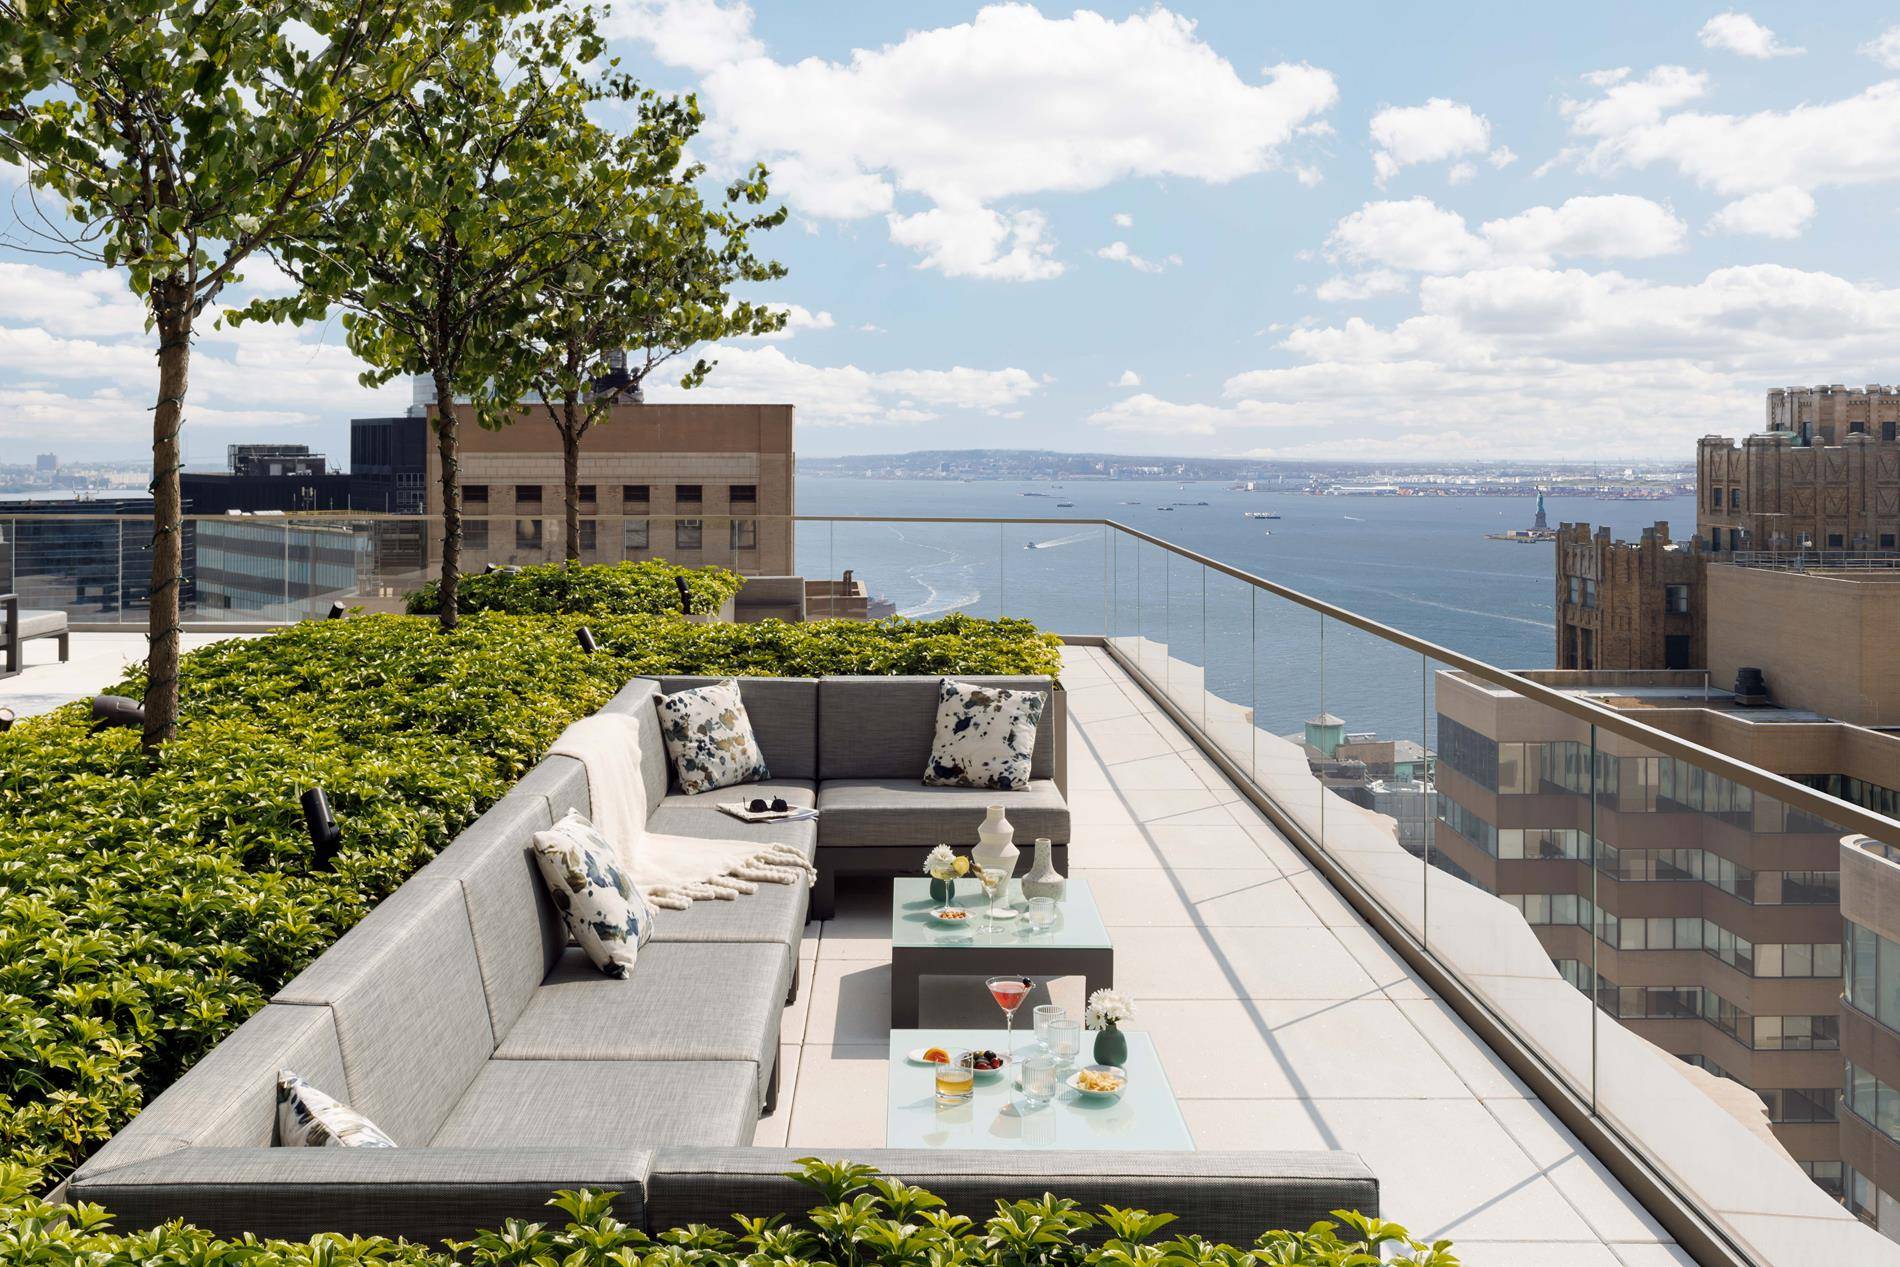 Move In Ready ! Residence 715 is the final remaining layout of its kind within One Wall Street.